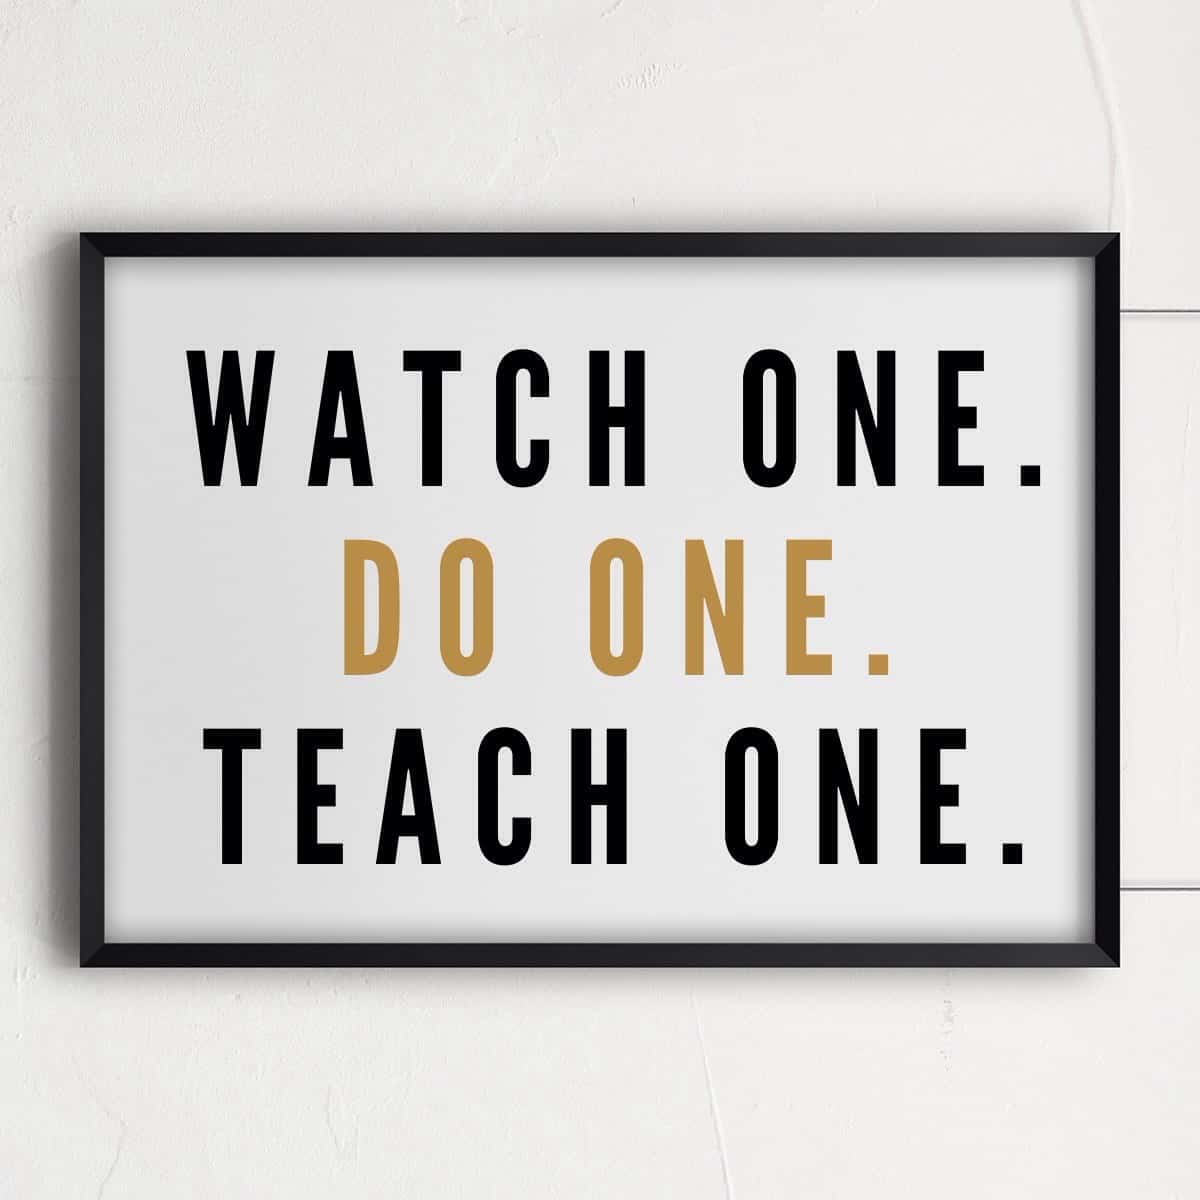 Watch one, do one, teach one? [Could you?]